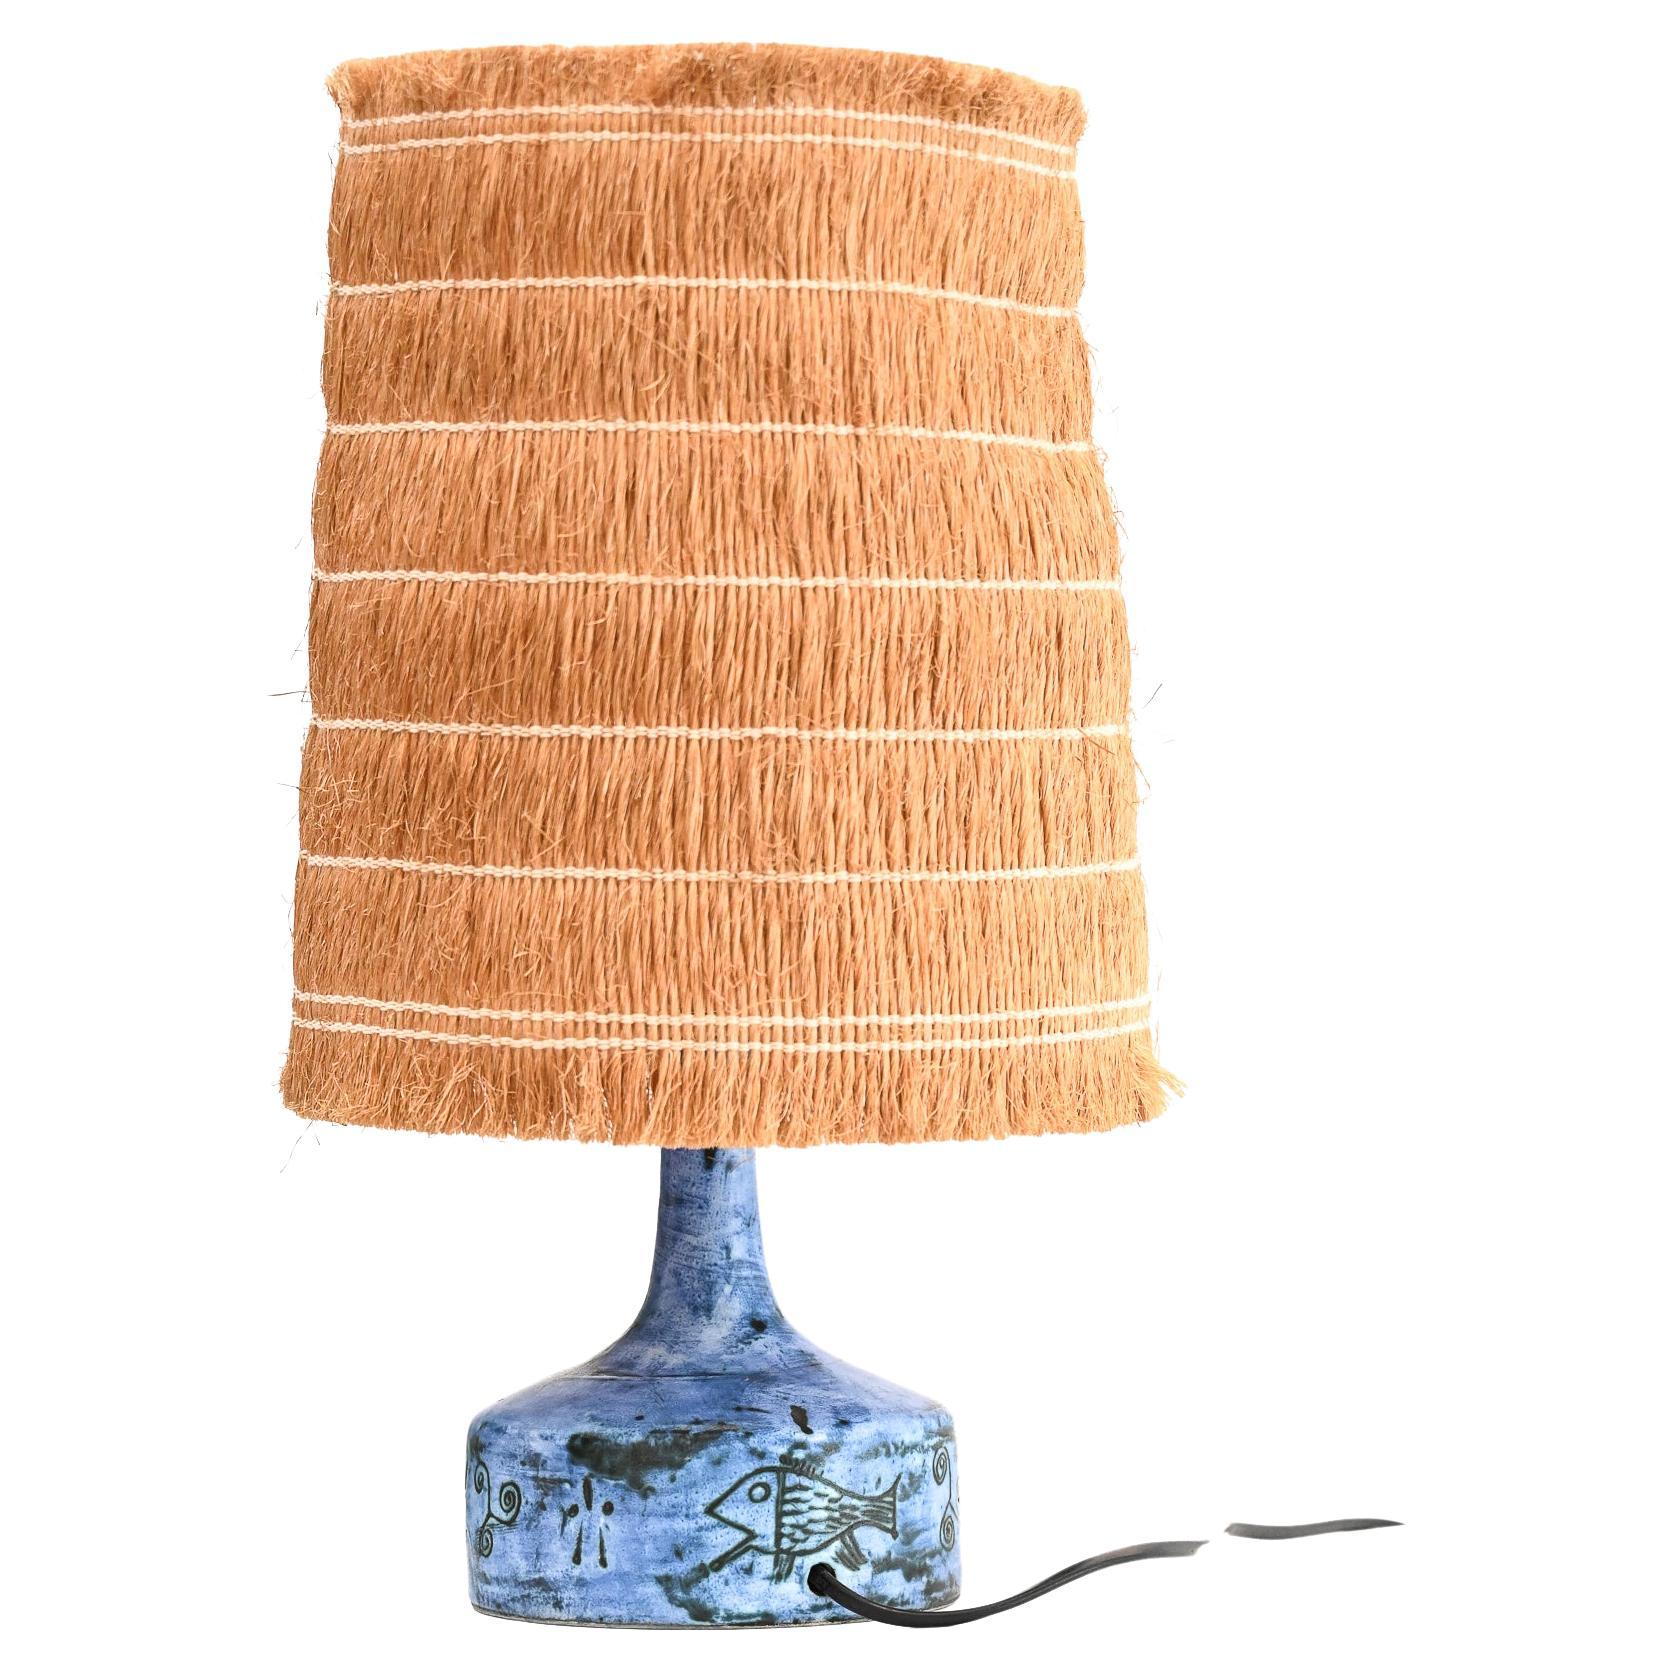 Jacques Blin table lamp “Whisky” model with its original lampshade

Mid-century ceramic table lamp (circa 1950s) by Jacques Blin, in iconic Jacques Blin blue with sgraffito-etched fish and geometric motifs in very good vintage condition